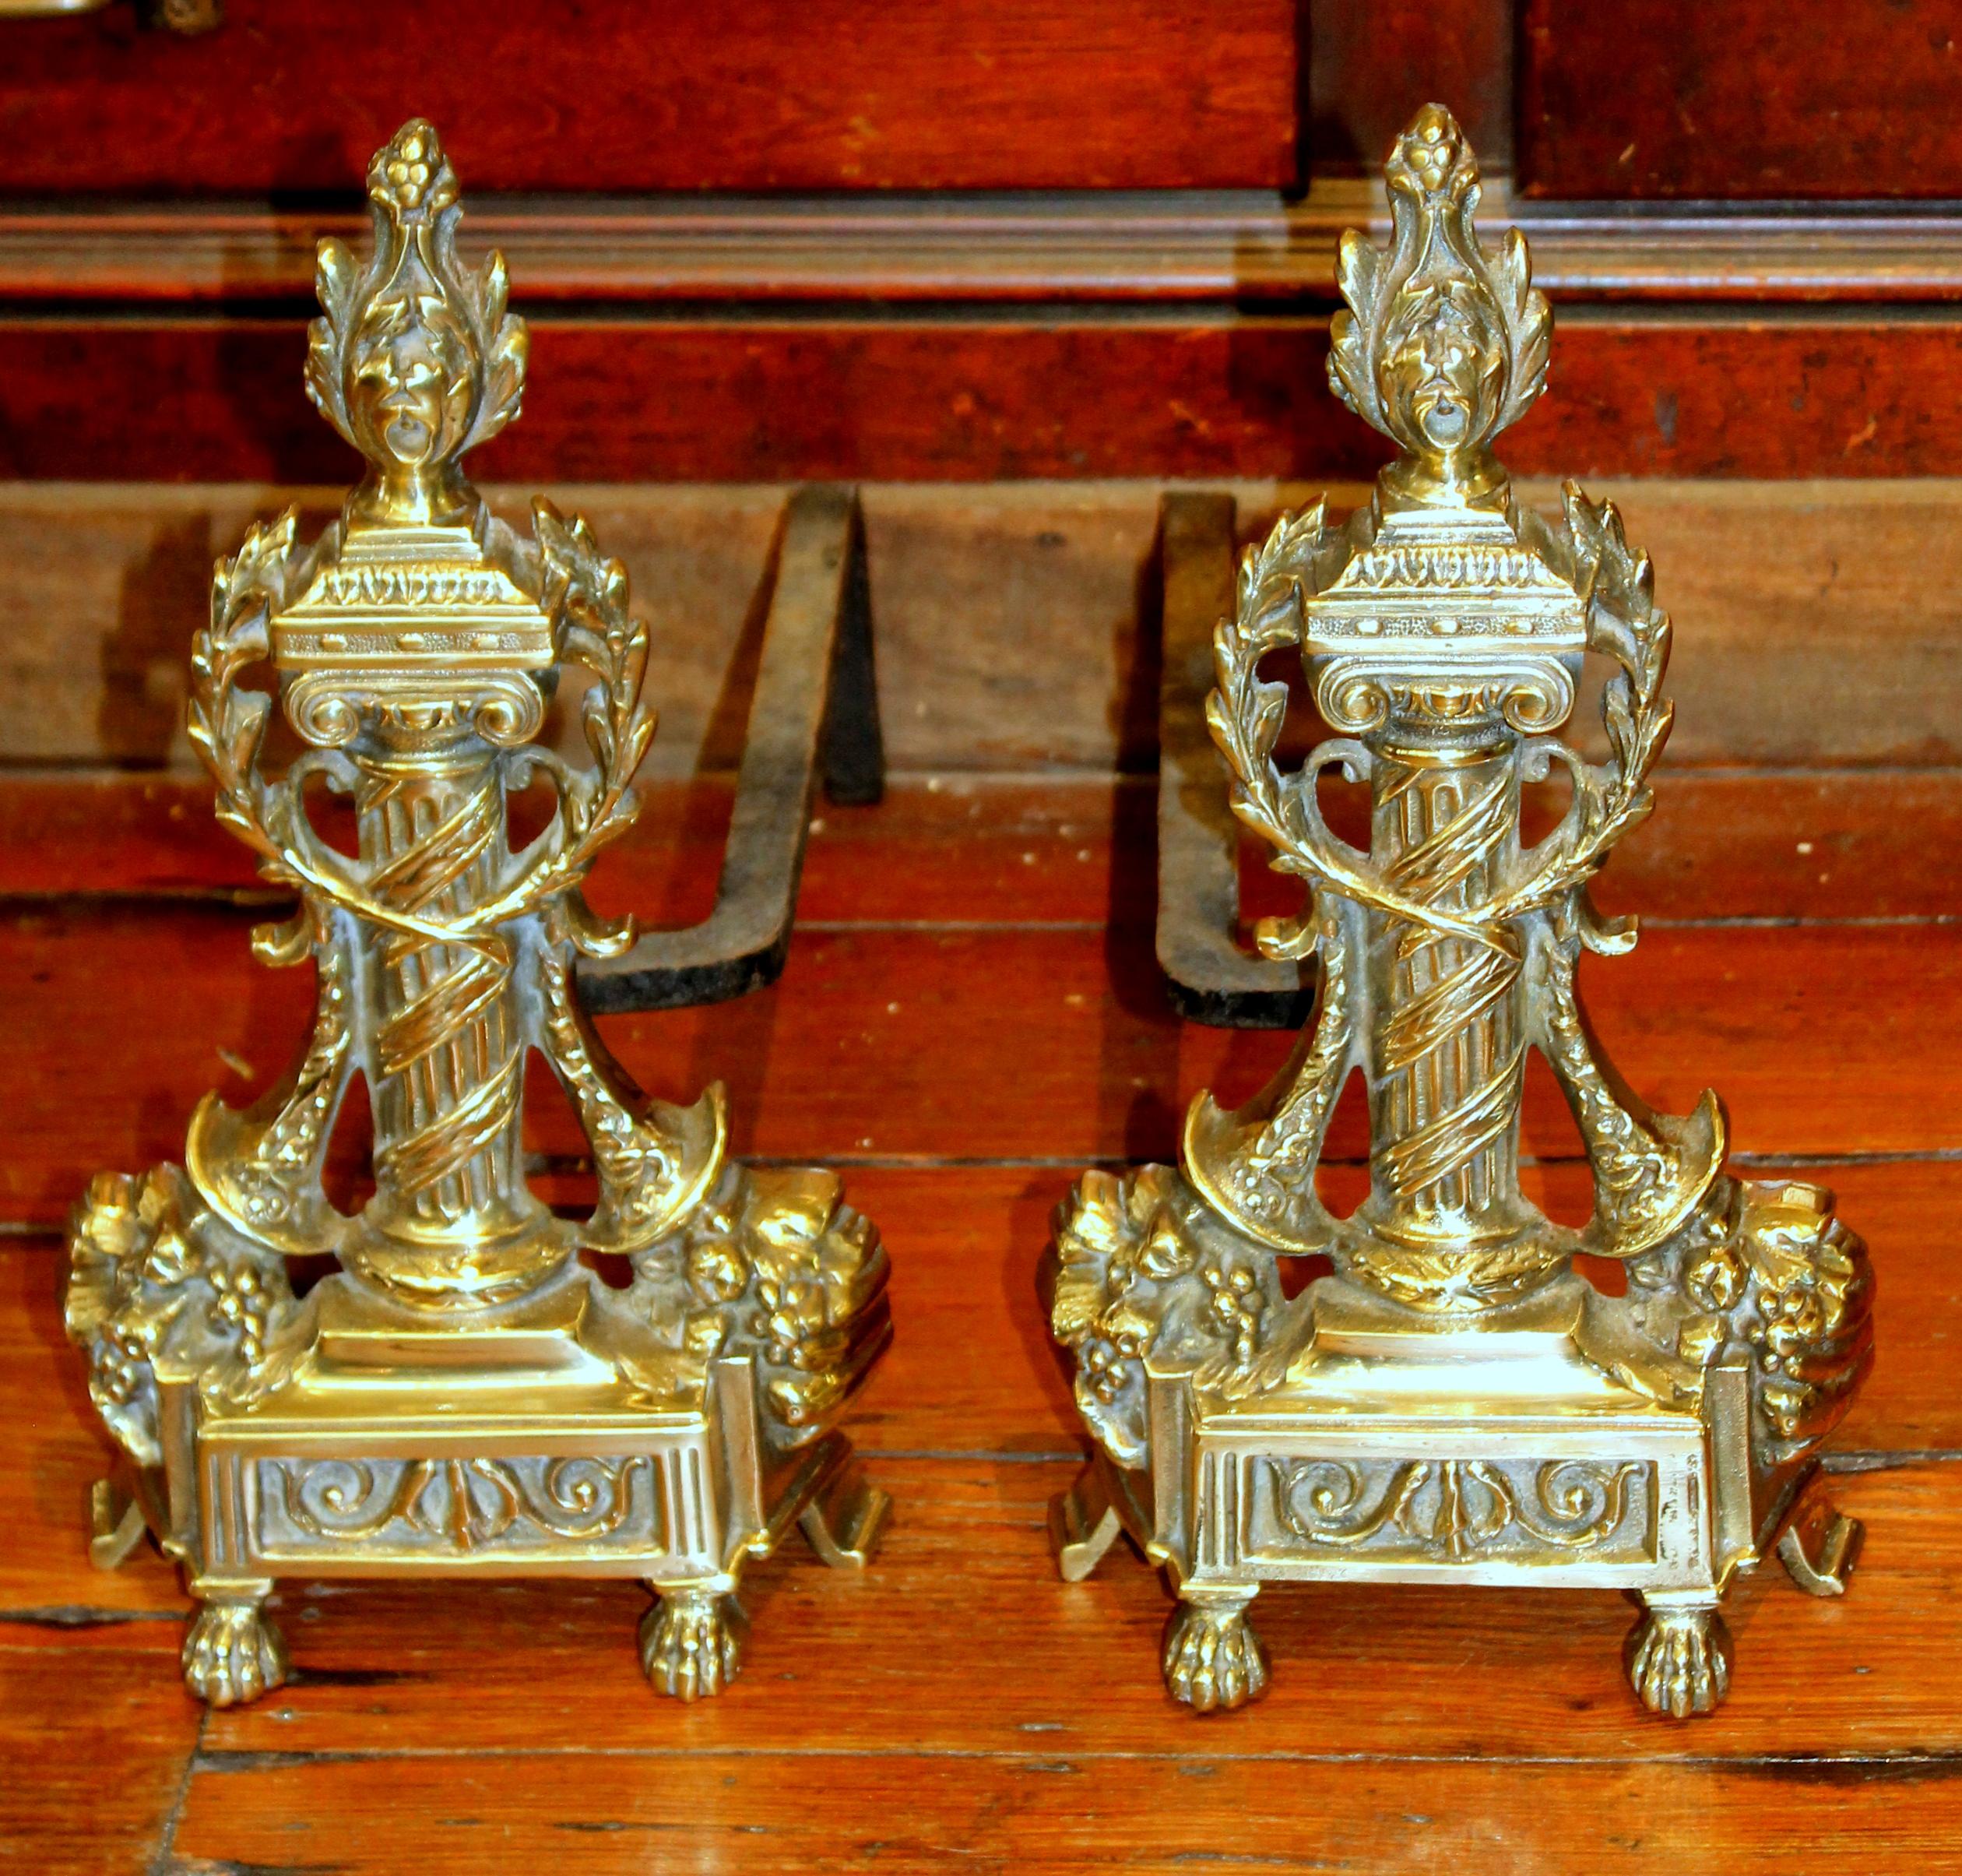 Pair of superb quality antique French style cast brass andirons; reeded neoclassical column design. Original cast iron returns.
 